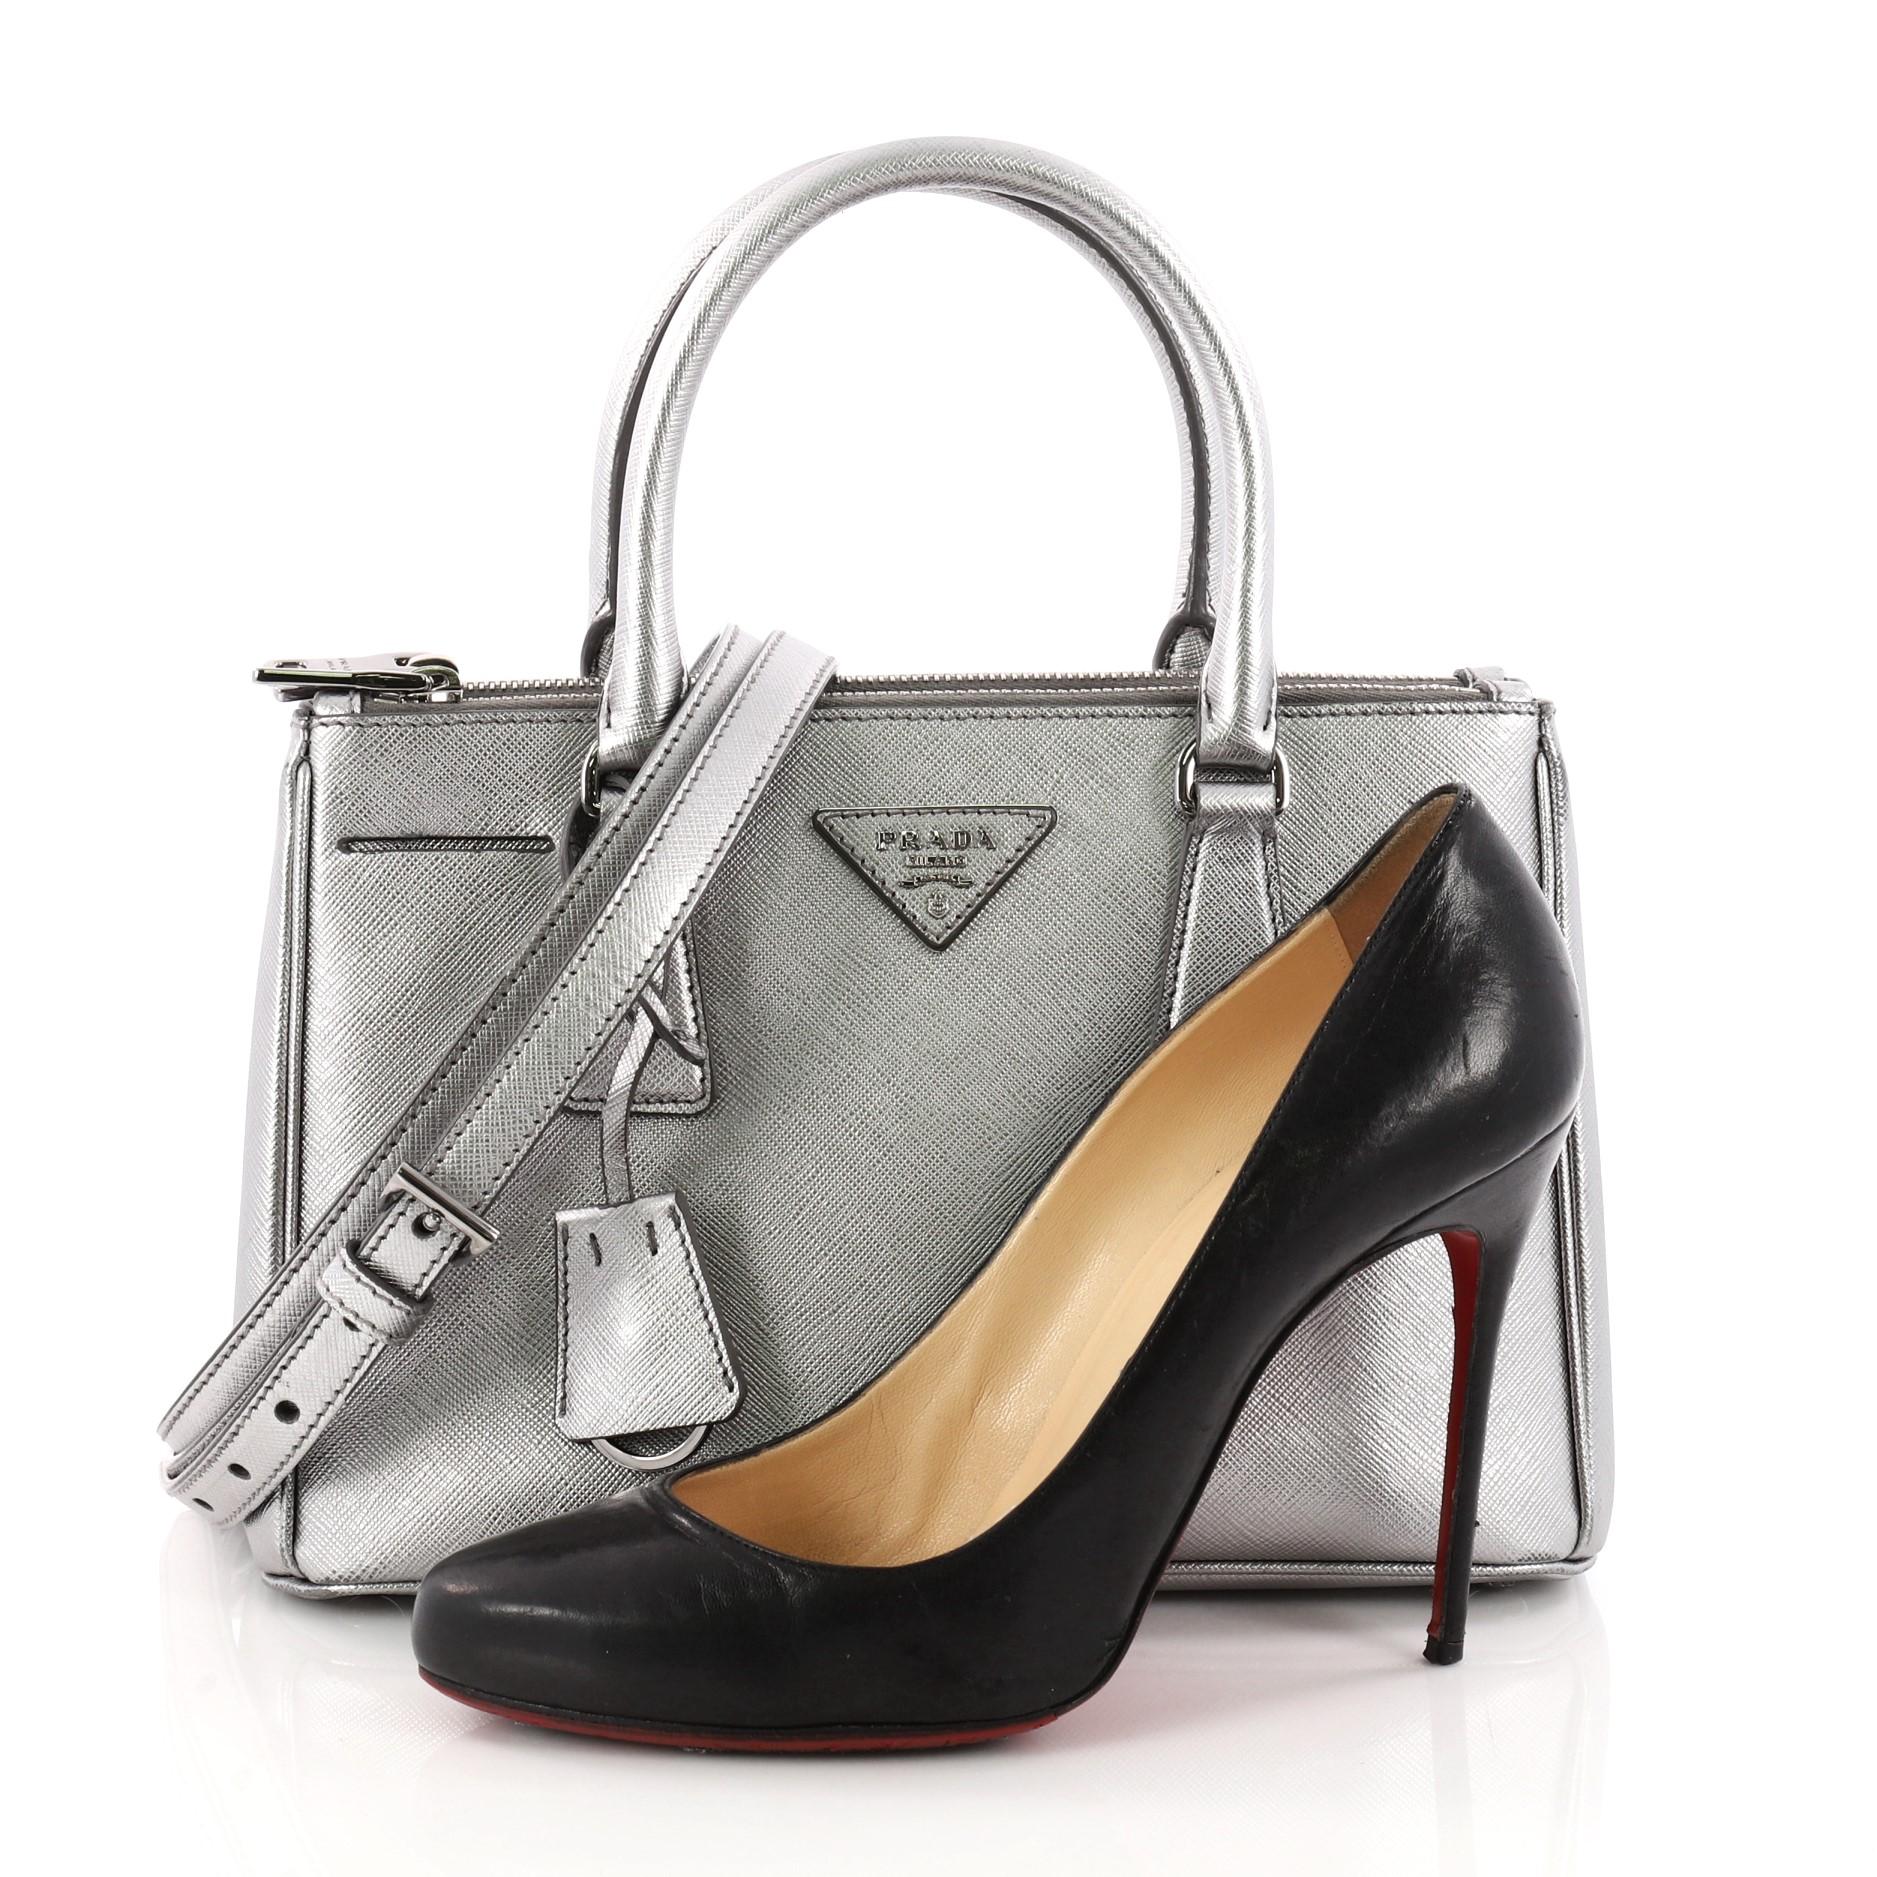 This authentic Prada Double Zip Lux Tote Saffiano Leather Mini is the perfect bag to complete any outfit. Crafted from metallic silver saffiano leather, this boxy tote features side snap buttons, raised Prada logo, dual-rolled leather handles and